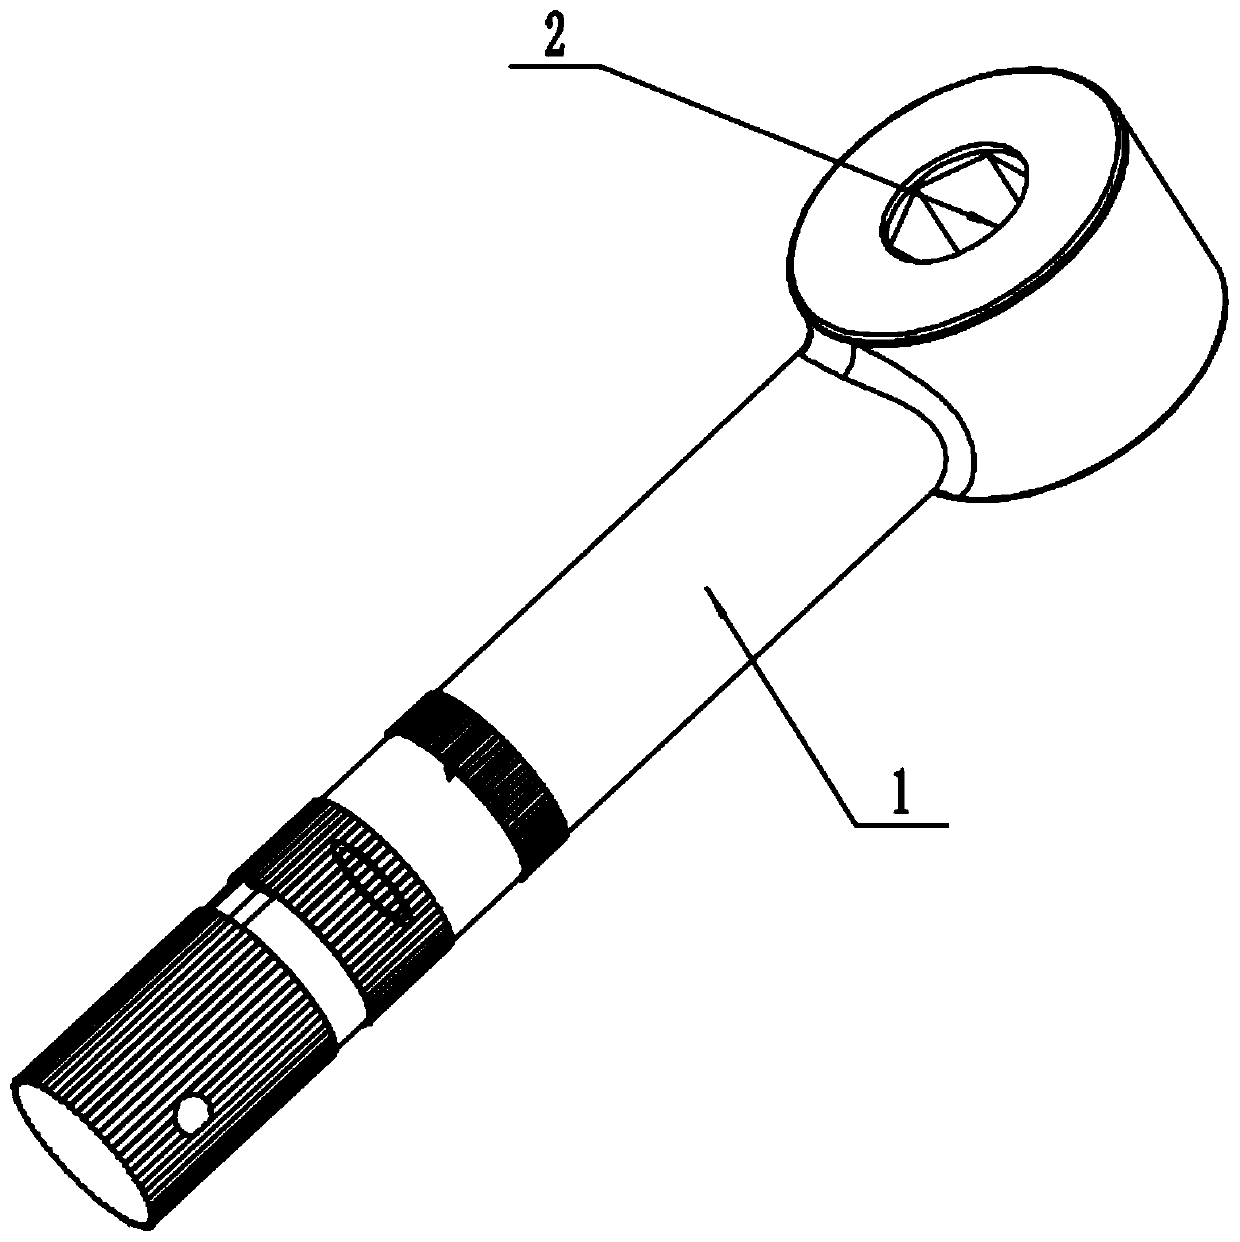 Auxiliary type wrench